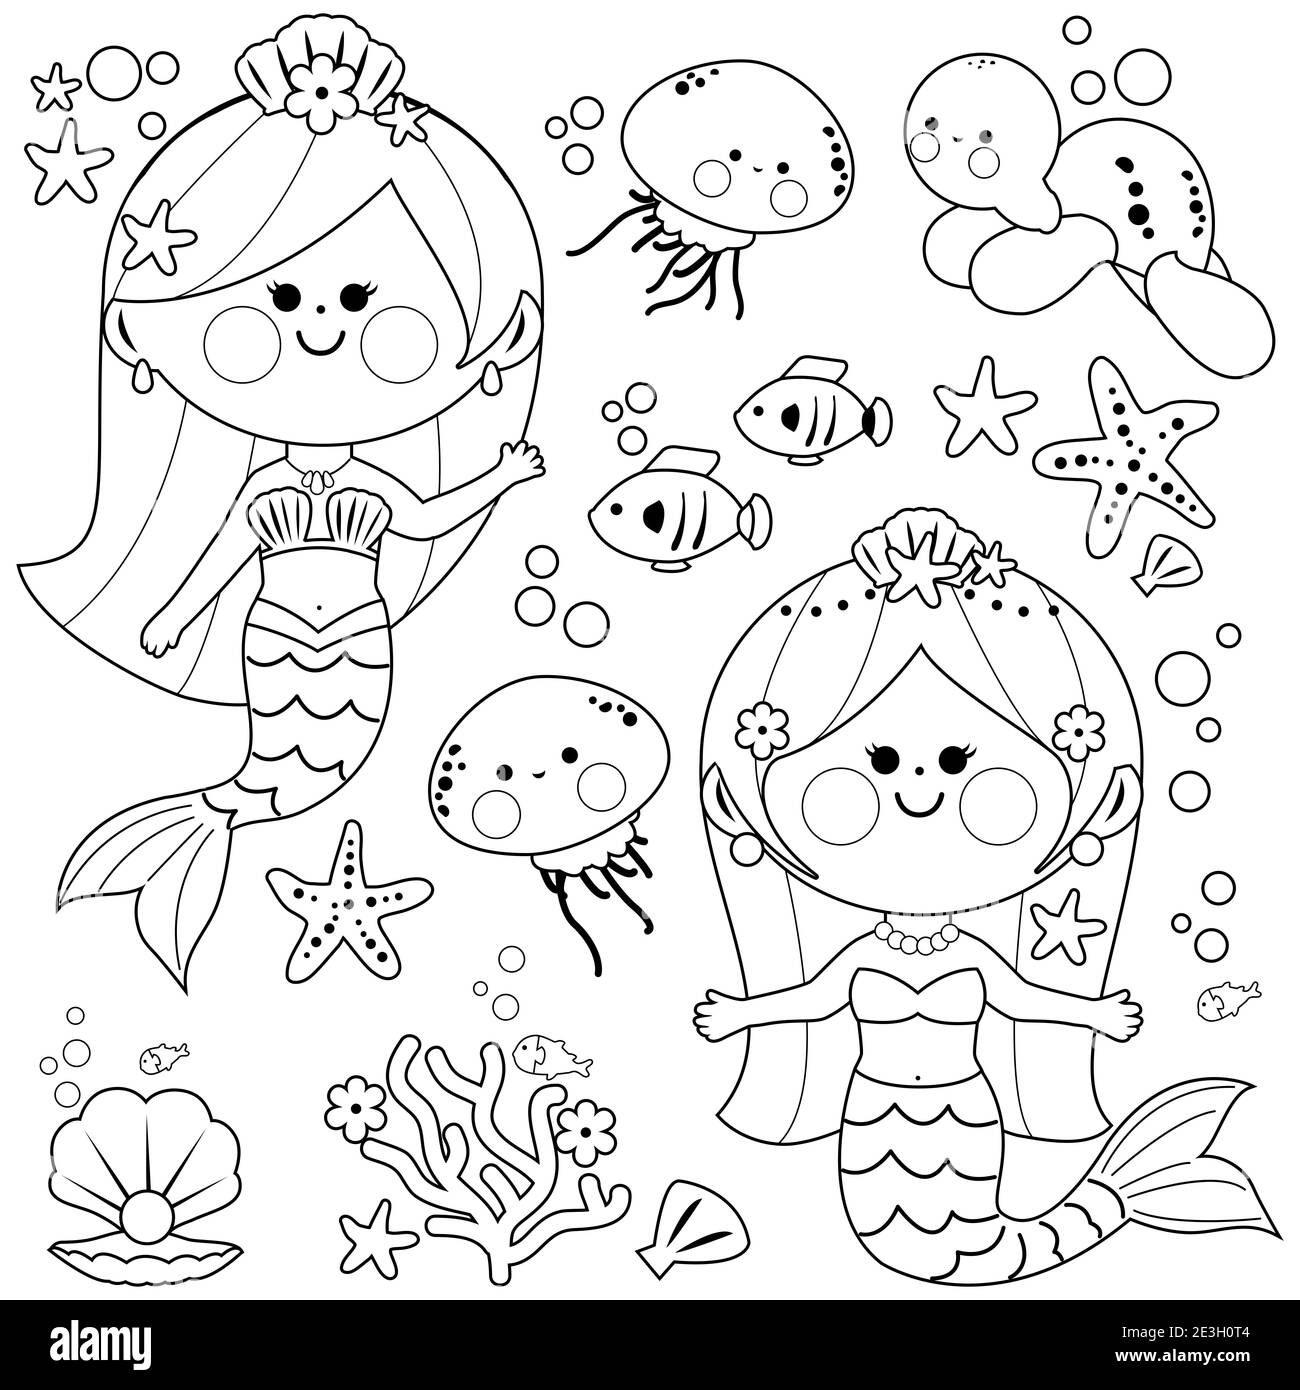 Cute mermaids, sea animals and fish under the sea. Black and white ...